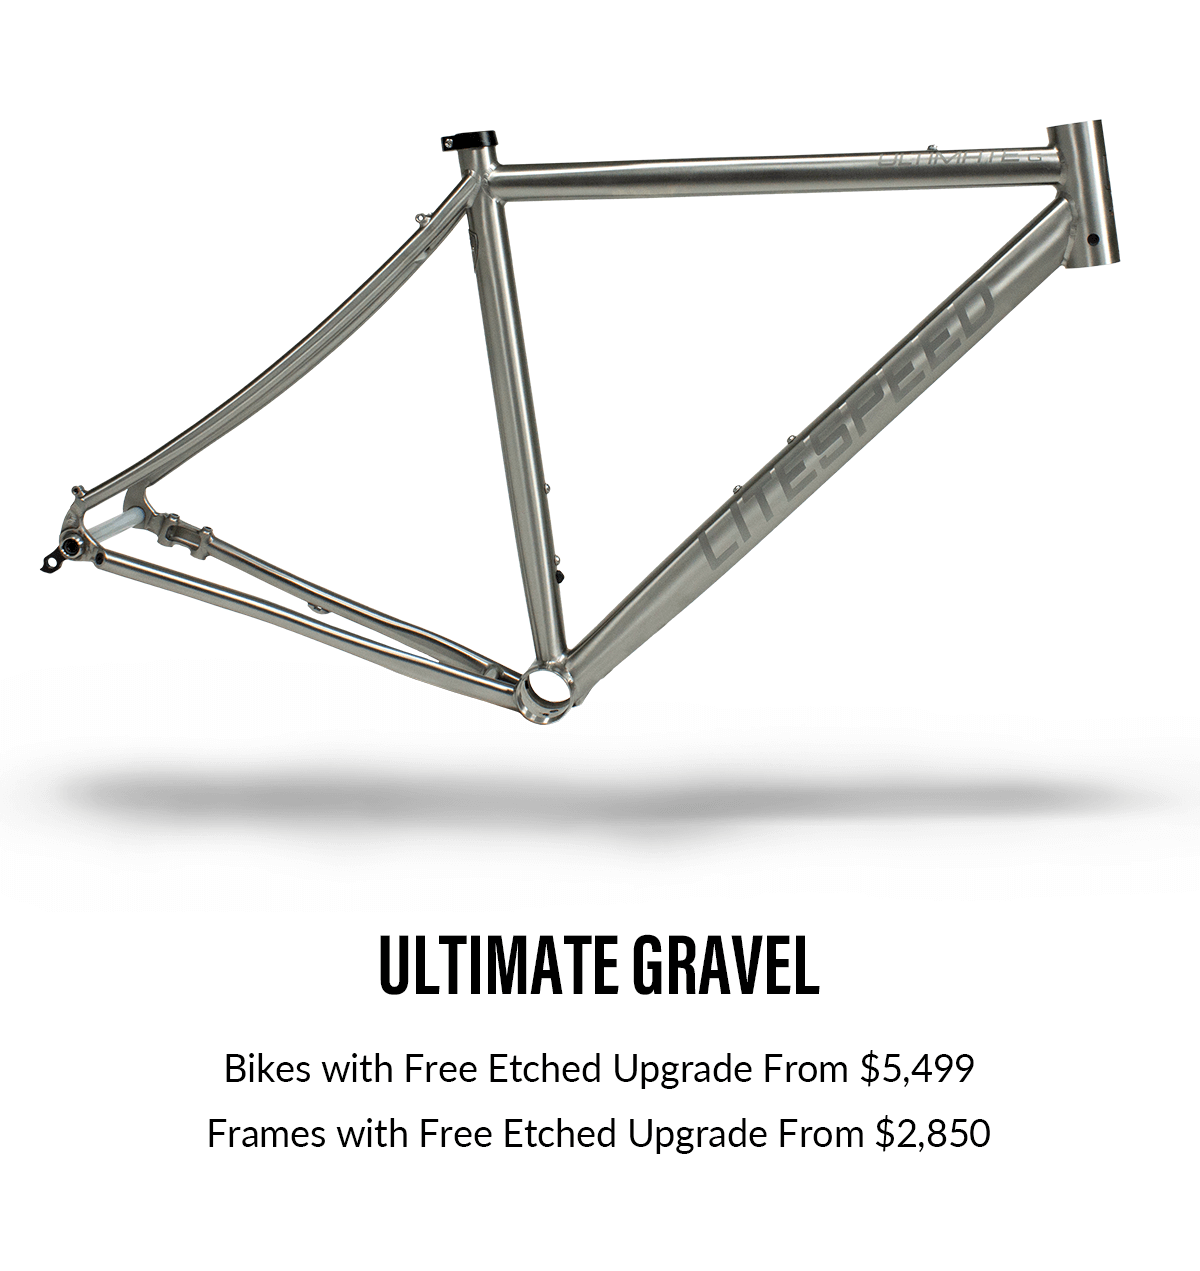 Ultimate gravel bikes starting at $5,499 with free etched upgrade.